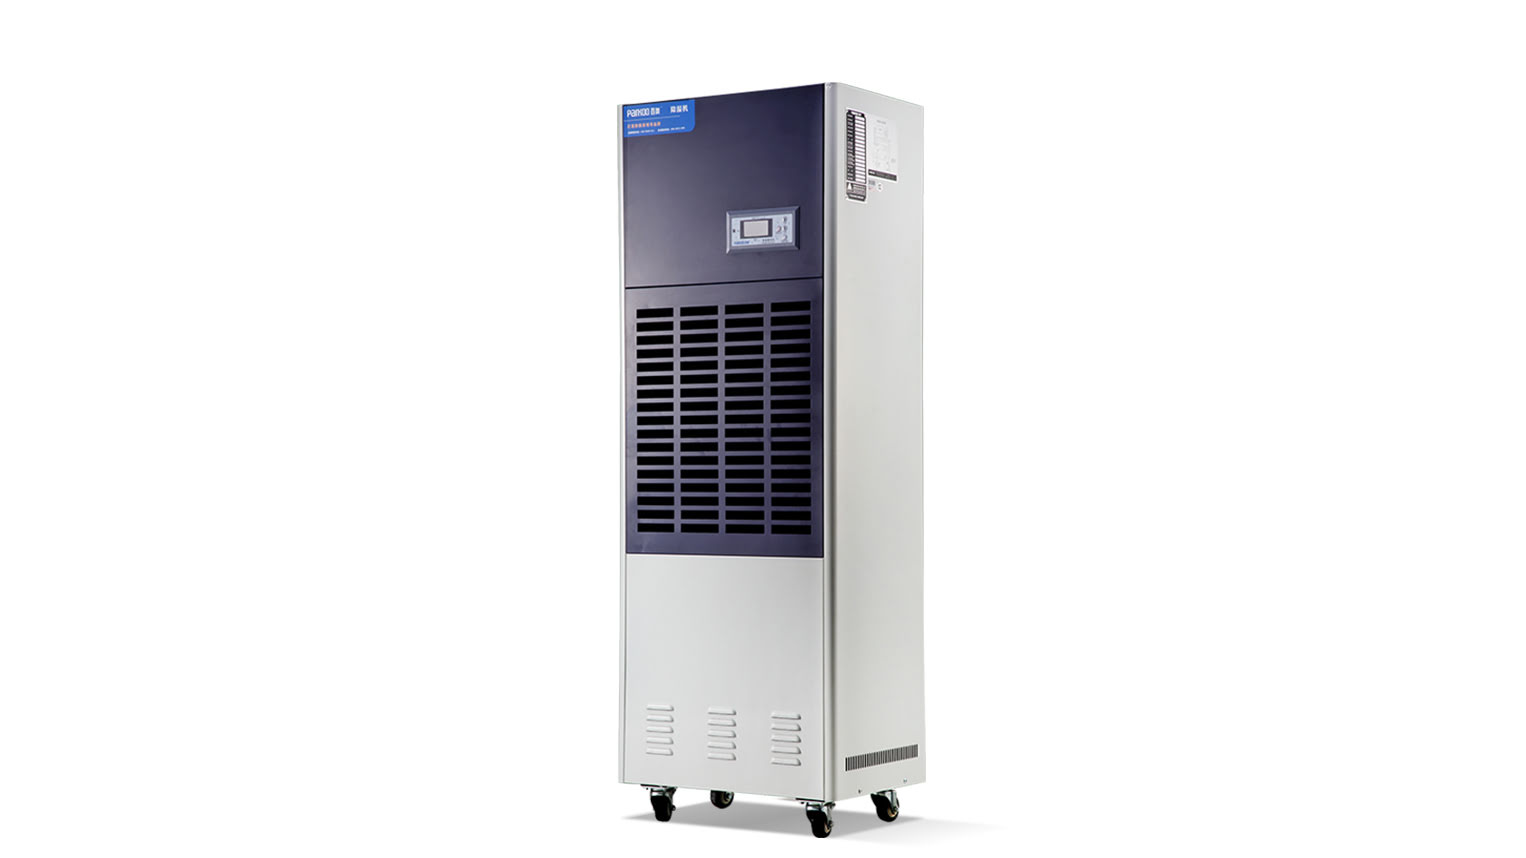 Dehumidifying and drying machine for agricultural products, which can clean, drain and dry agricultural products quickly